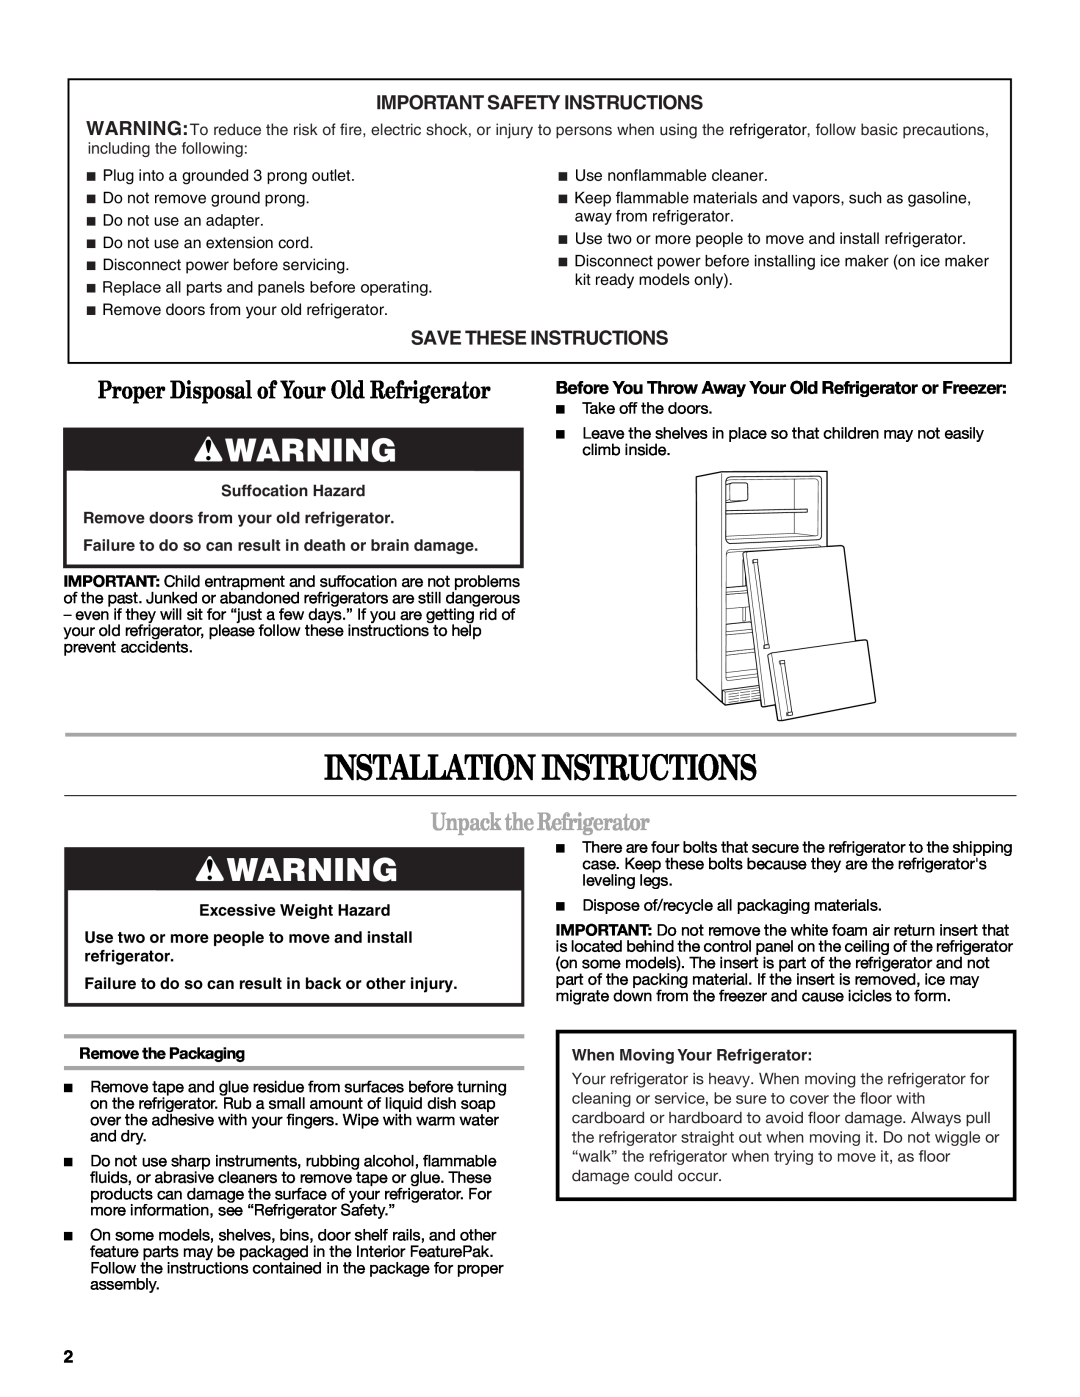 Whirlpool W10217604A Installation Instructions, Proper Disposal of Your Old Refrigerator, Unpack the Refrigerator 